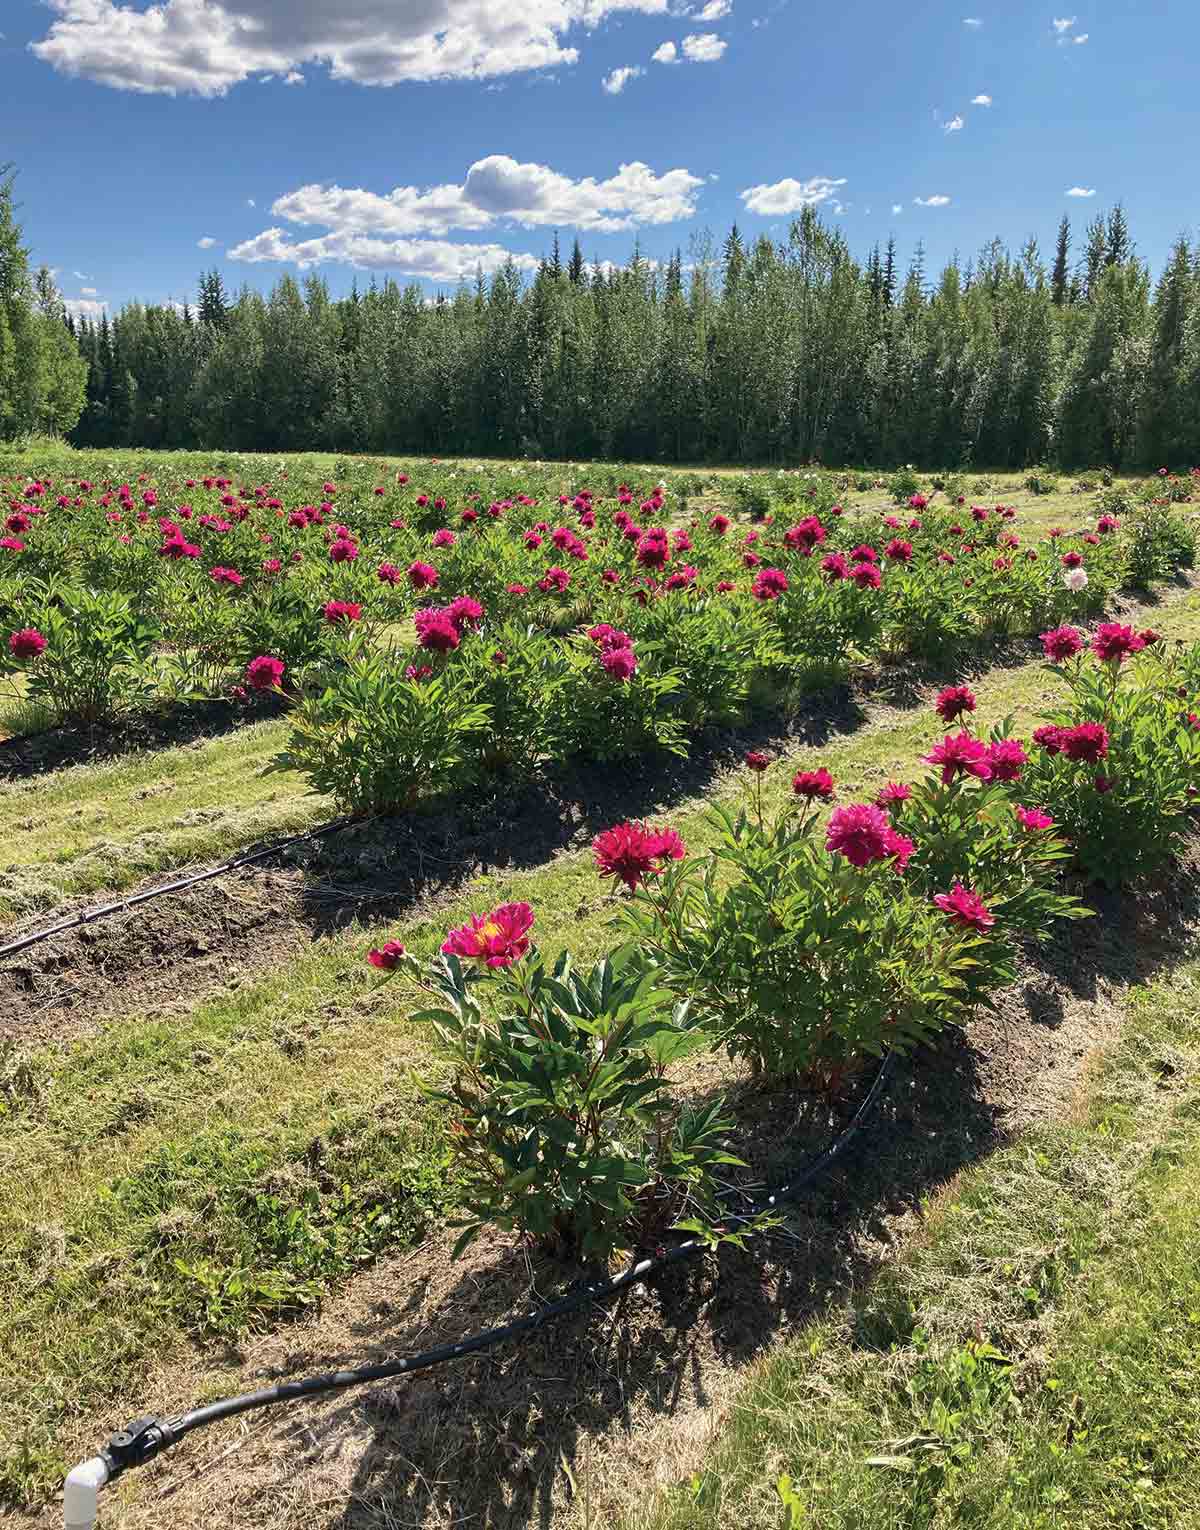 North Pole Peonies was founded by Ron and Marji Illingworth in 2003 and is located 15 miles outside North Pole.